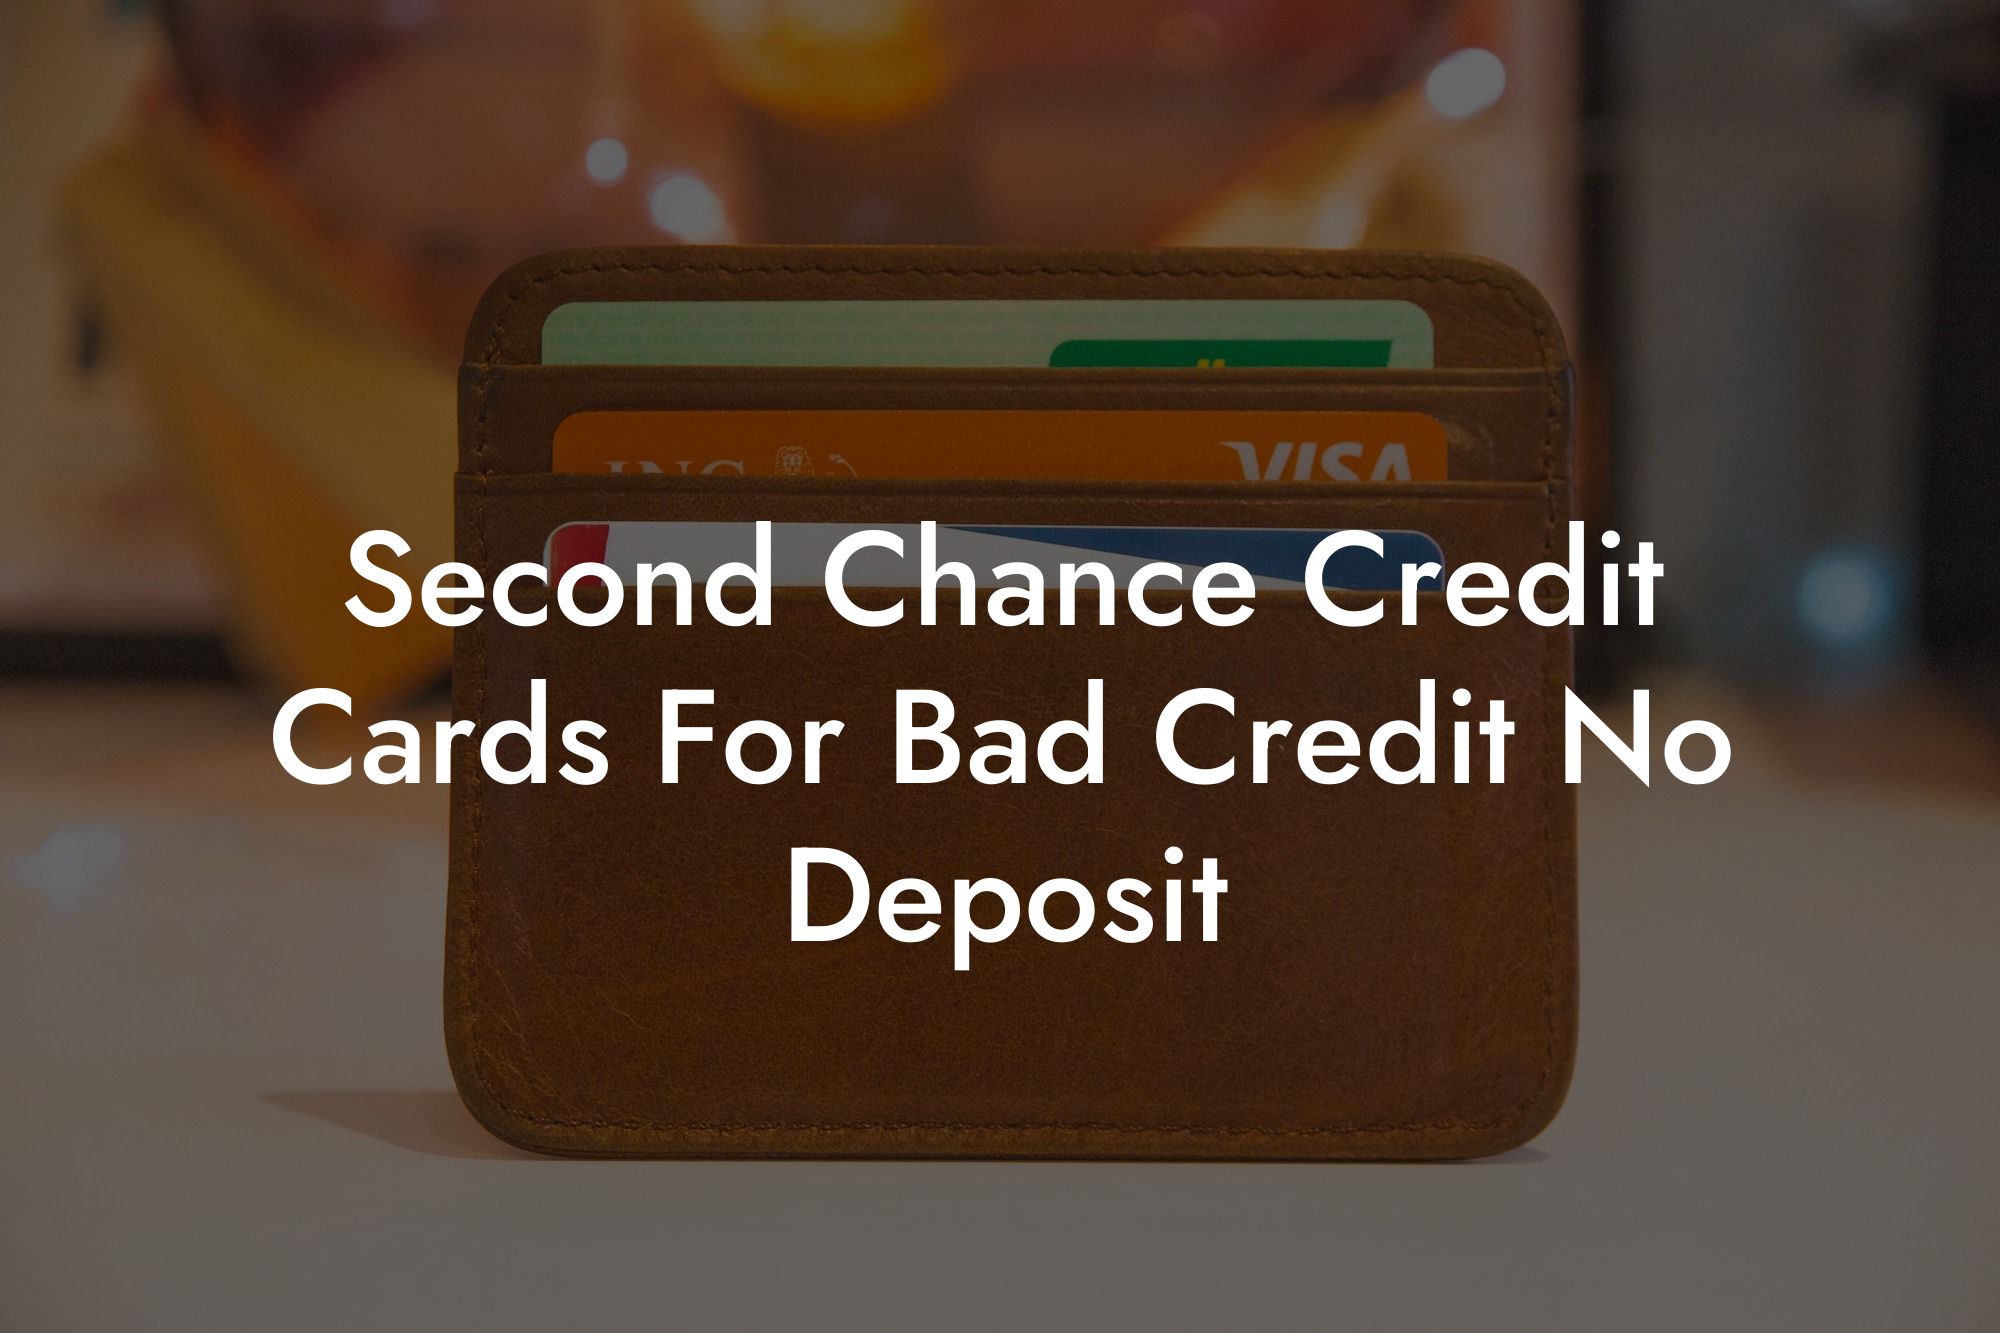 Second Chance Credit Cards For Bad Credit No Deposit